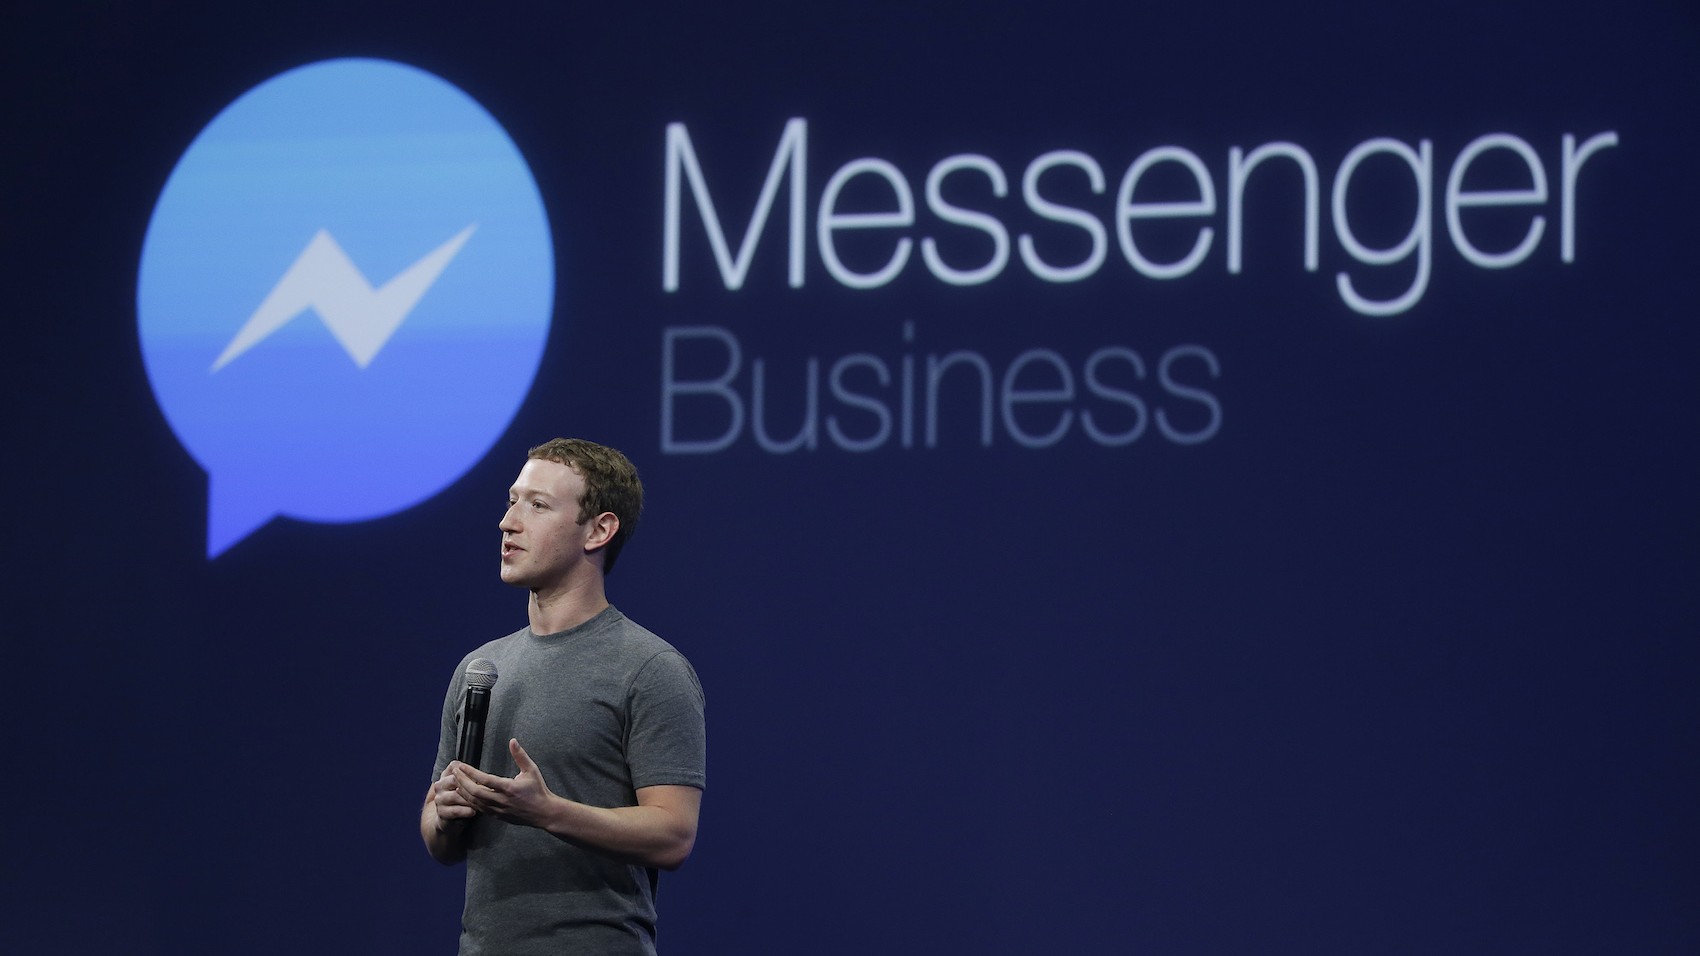 Report: Facebook Is Turning Messenger Into A Mobile Wallet